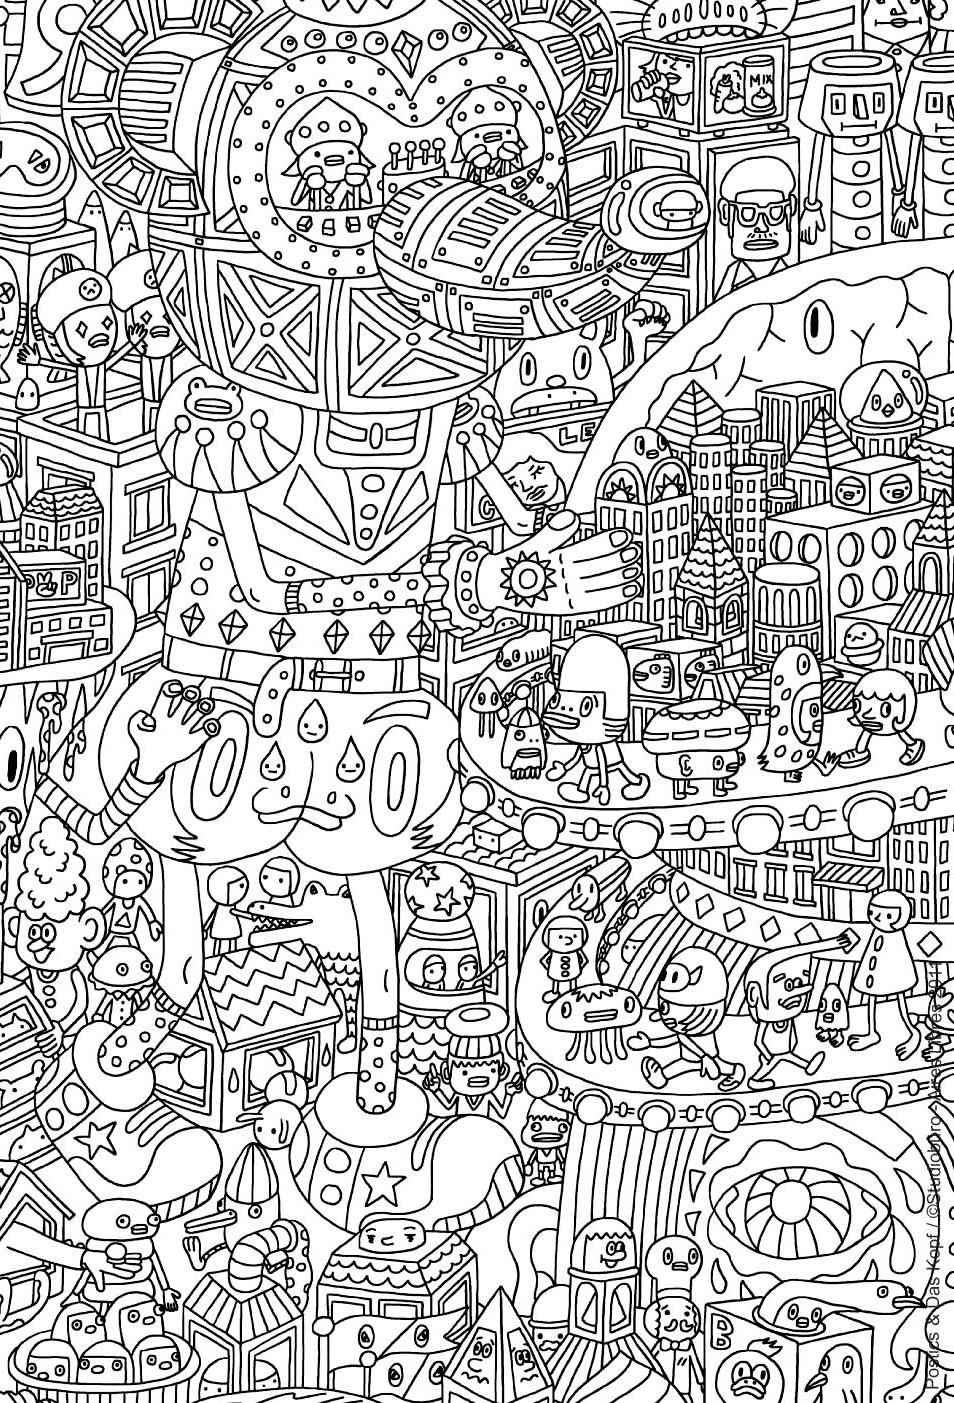 Doodle art doodling 13 - Doodle Art / Doodling Adult Coloring Pages